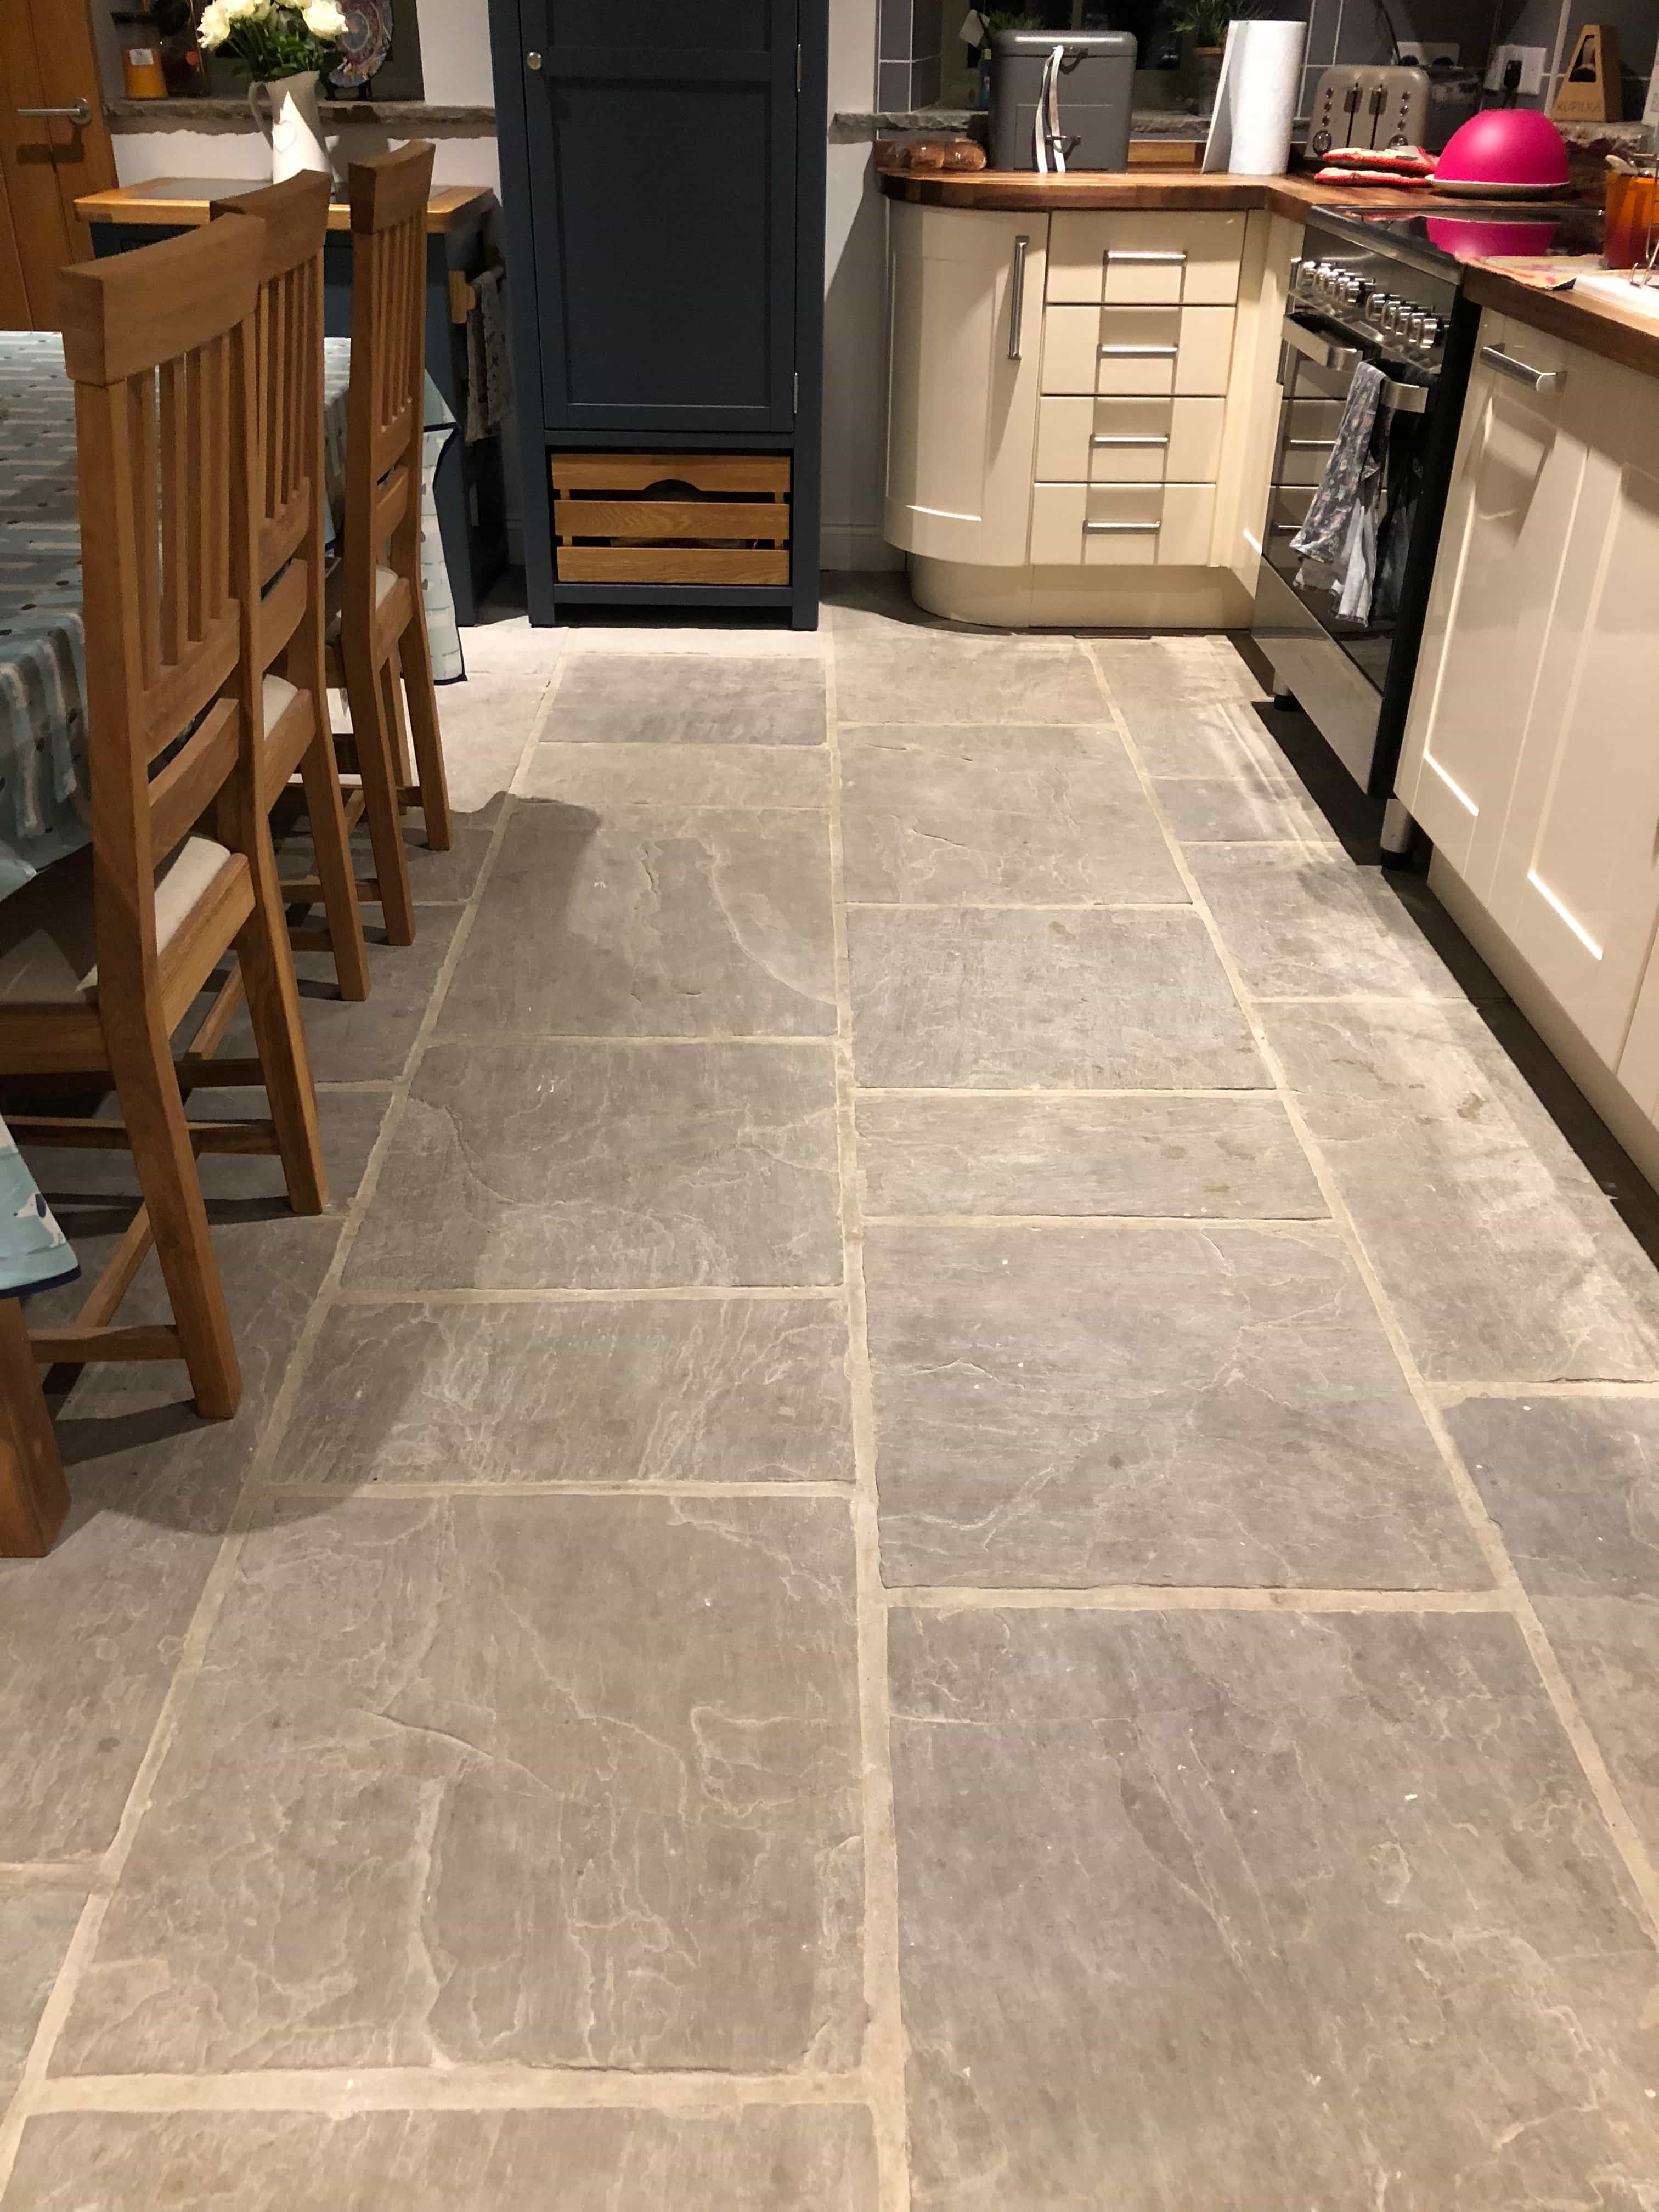 Dealing With A Rough Sandstone Kitchen Floor In Colne Lancashire